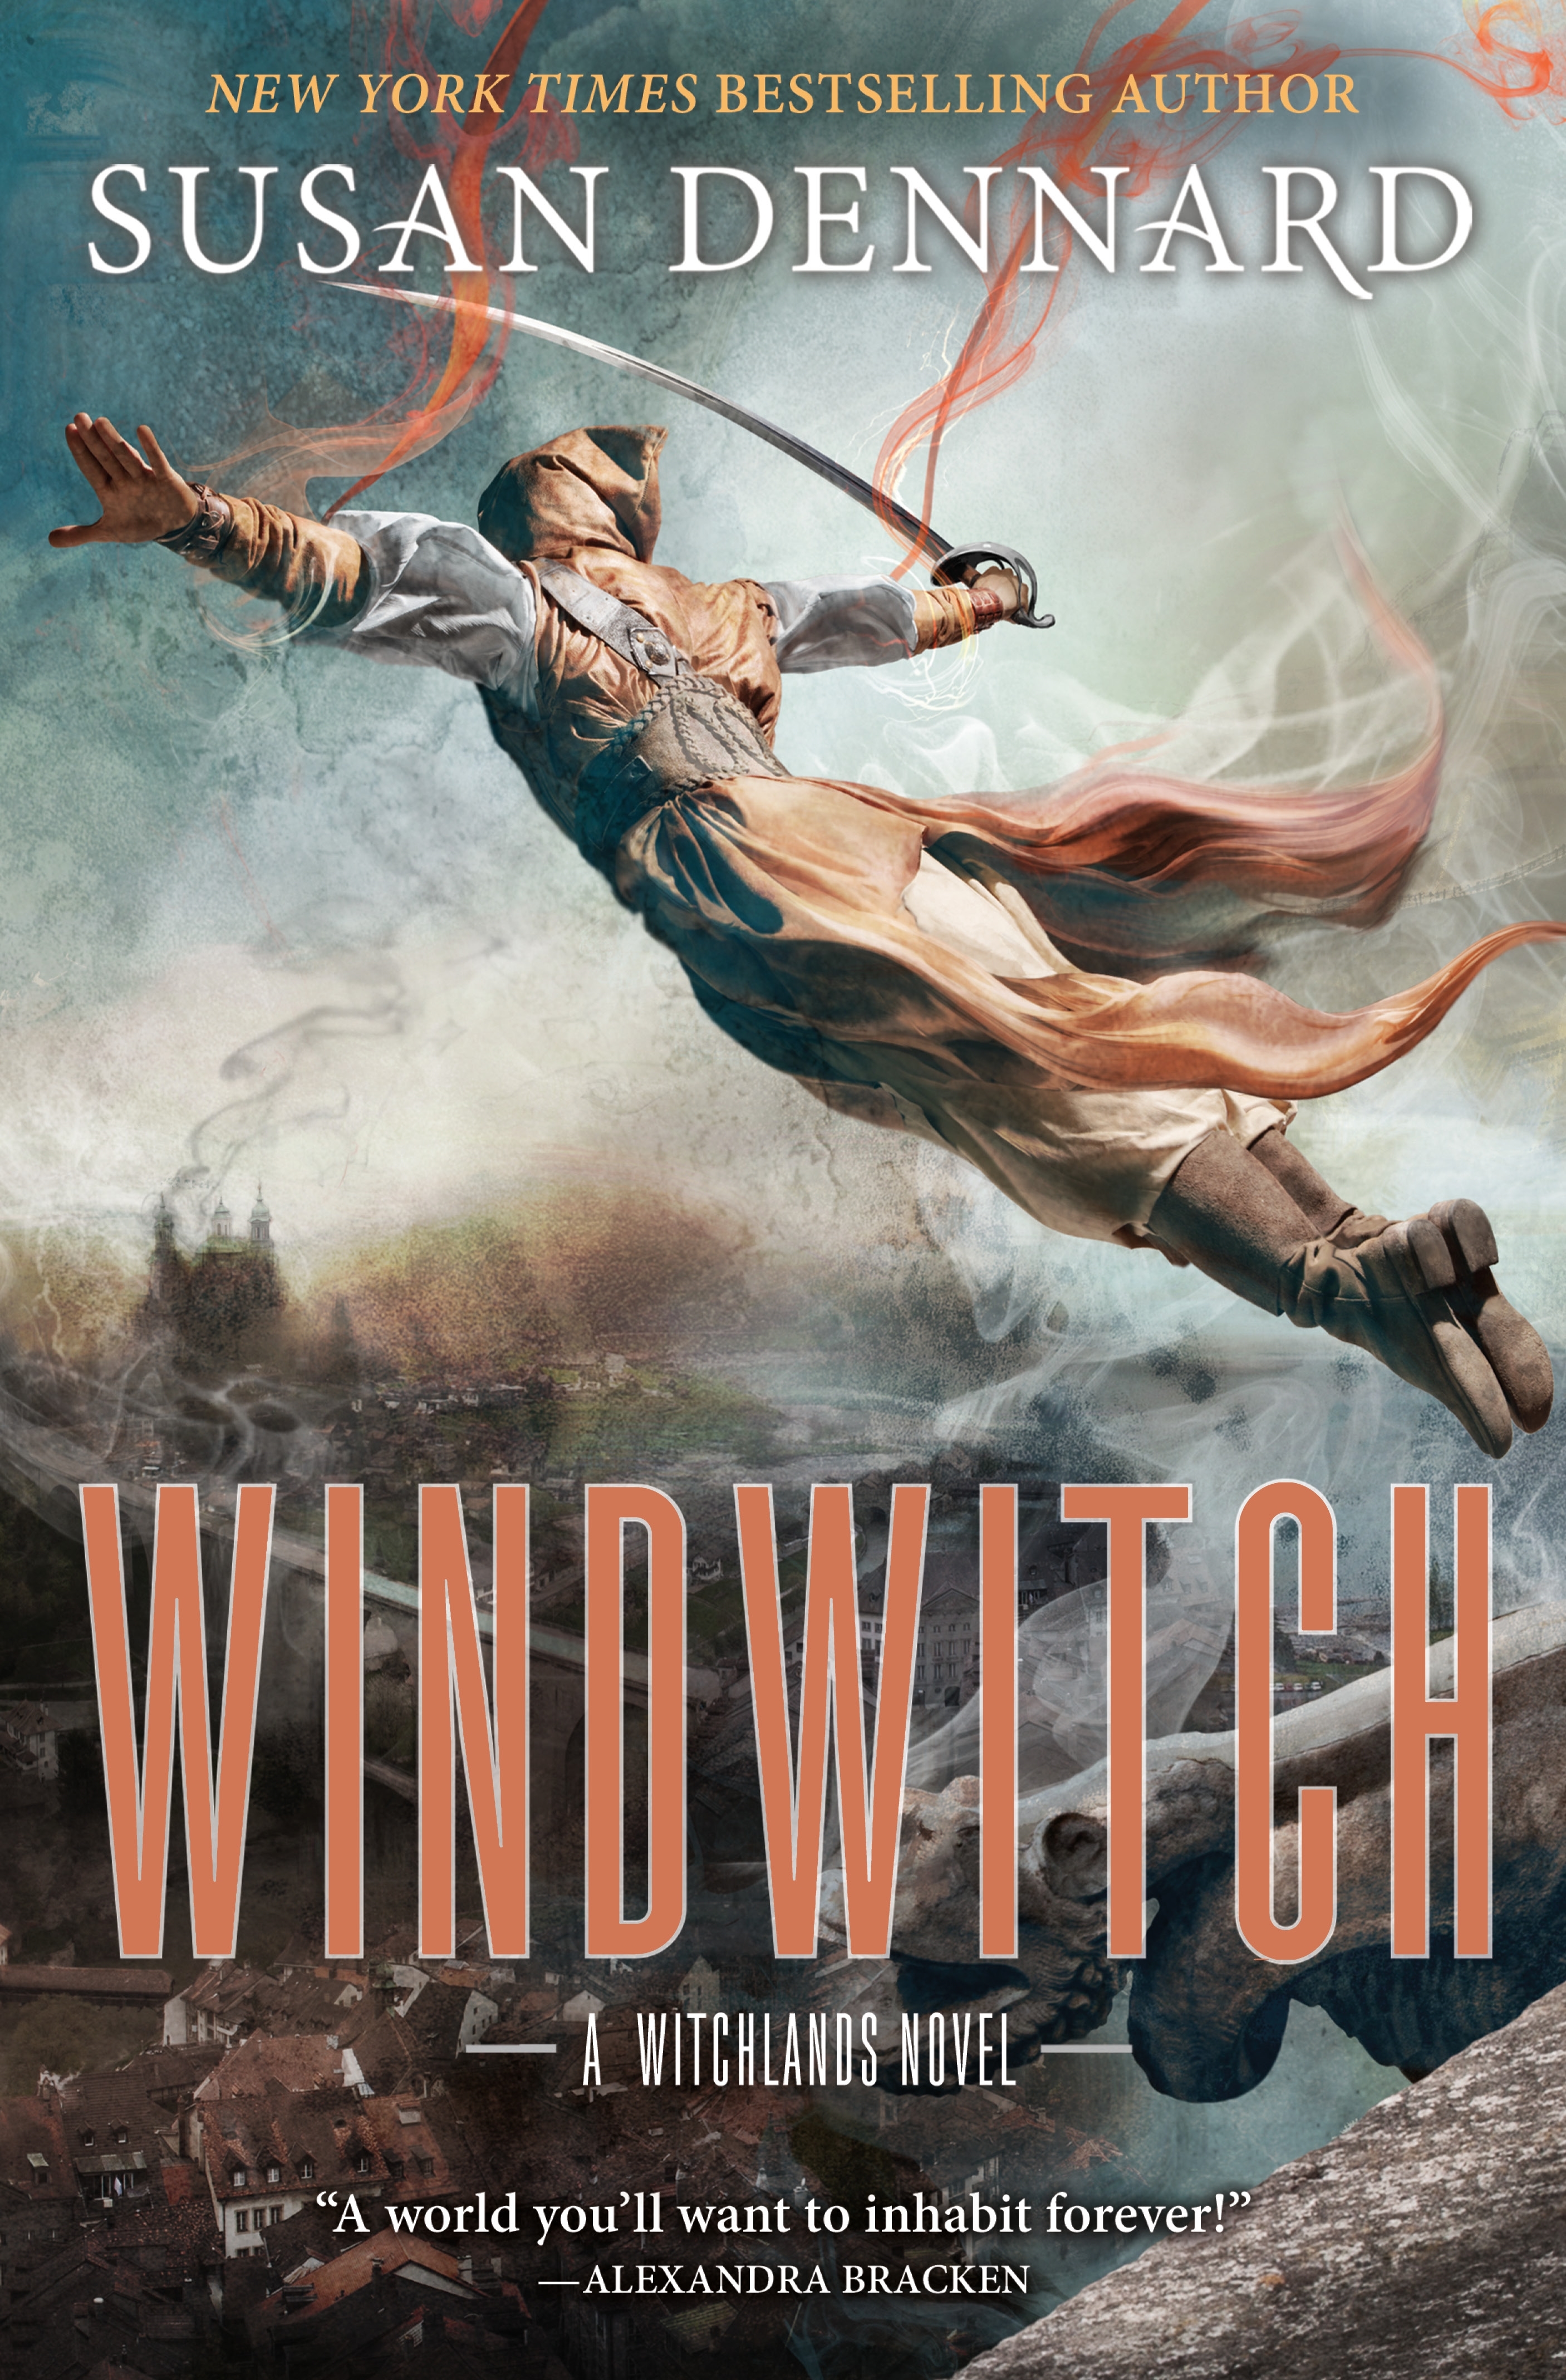 Windwitch : The Witchlands by Susan Dennard